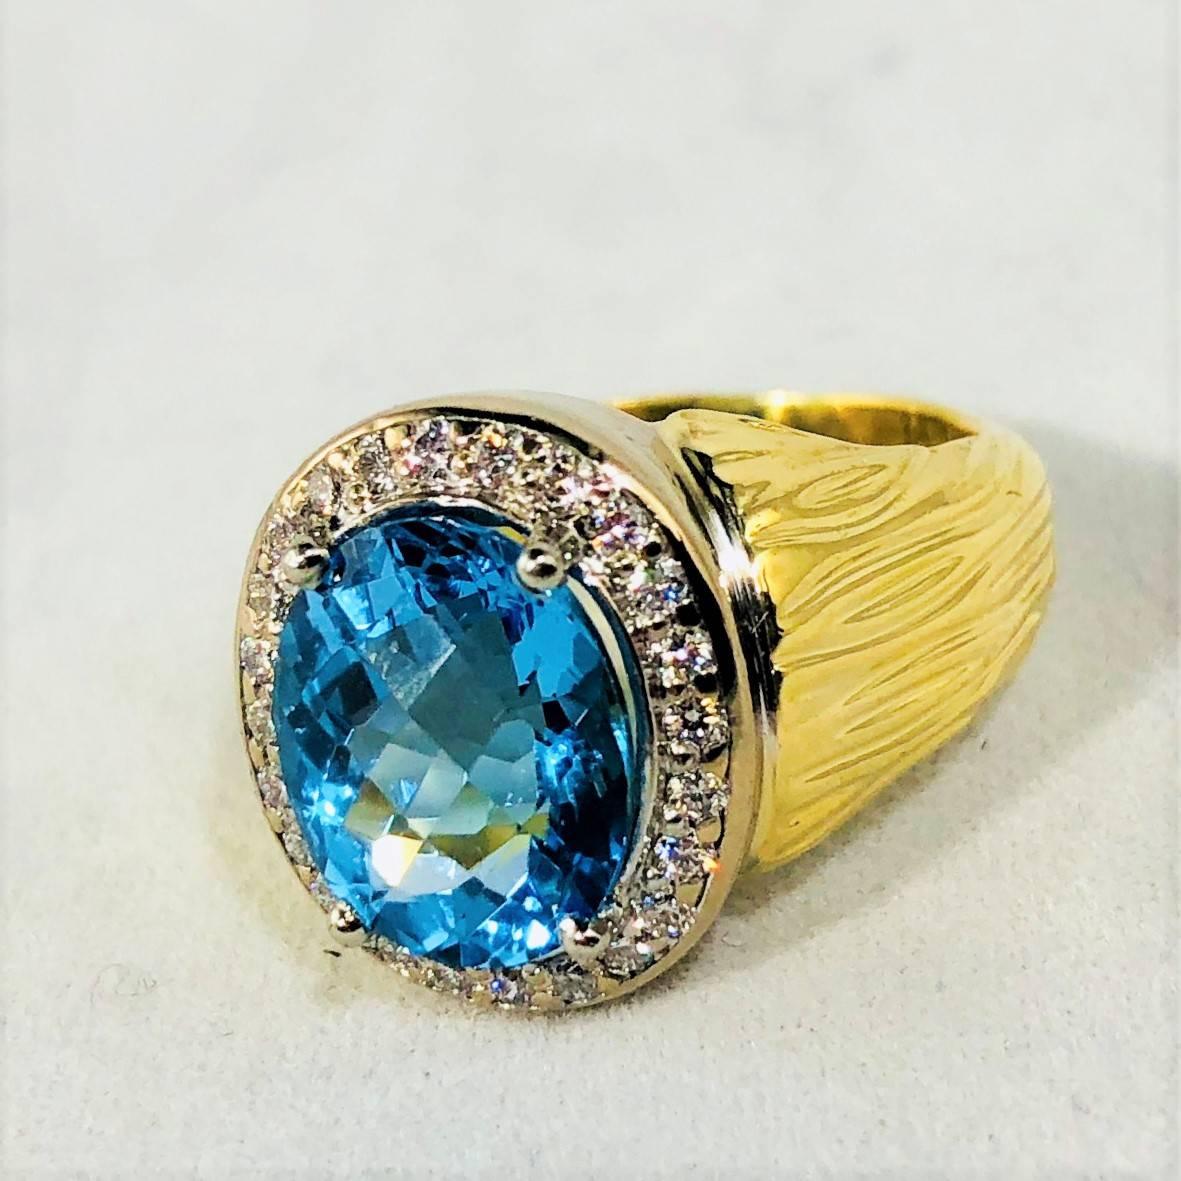 18 karat yellow gold and white gold blue topaz and diamond ring, 1- oval blue topaz measuring 11mm x 9mm, bright light blue color, 24- full cut round diamonds = .23 carat total weight, average color G-H, average clarity VS1, 18 karat  weight 11